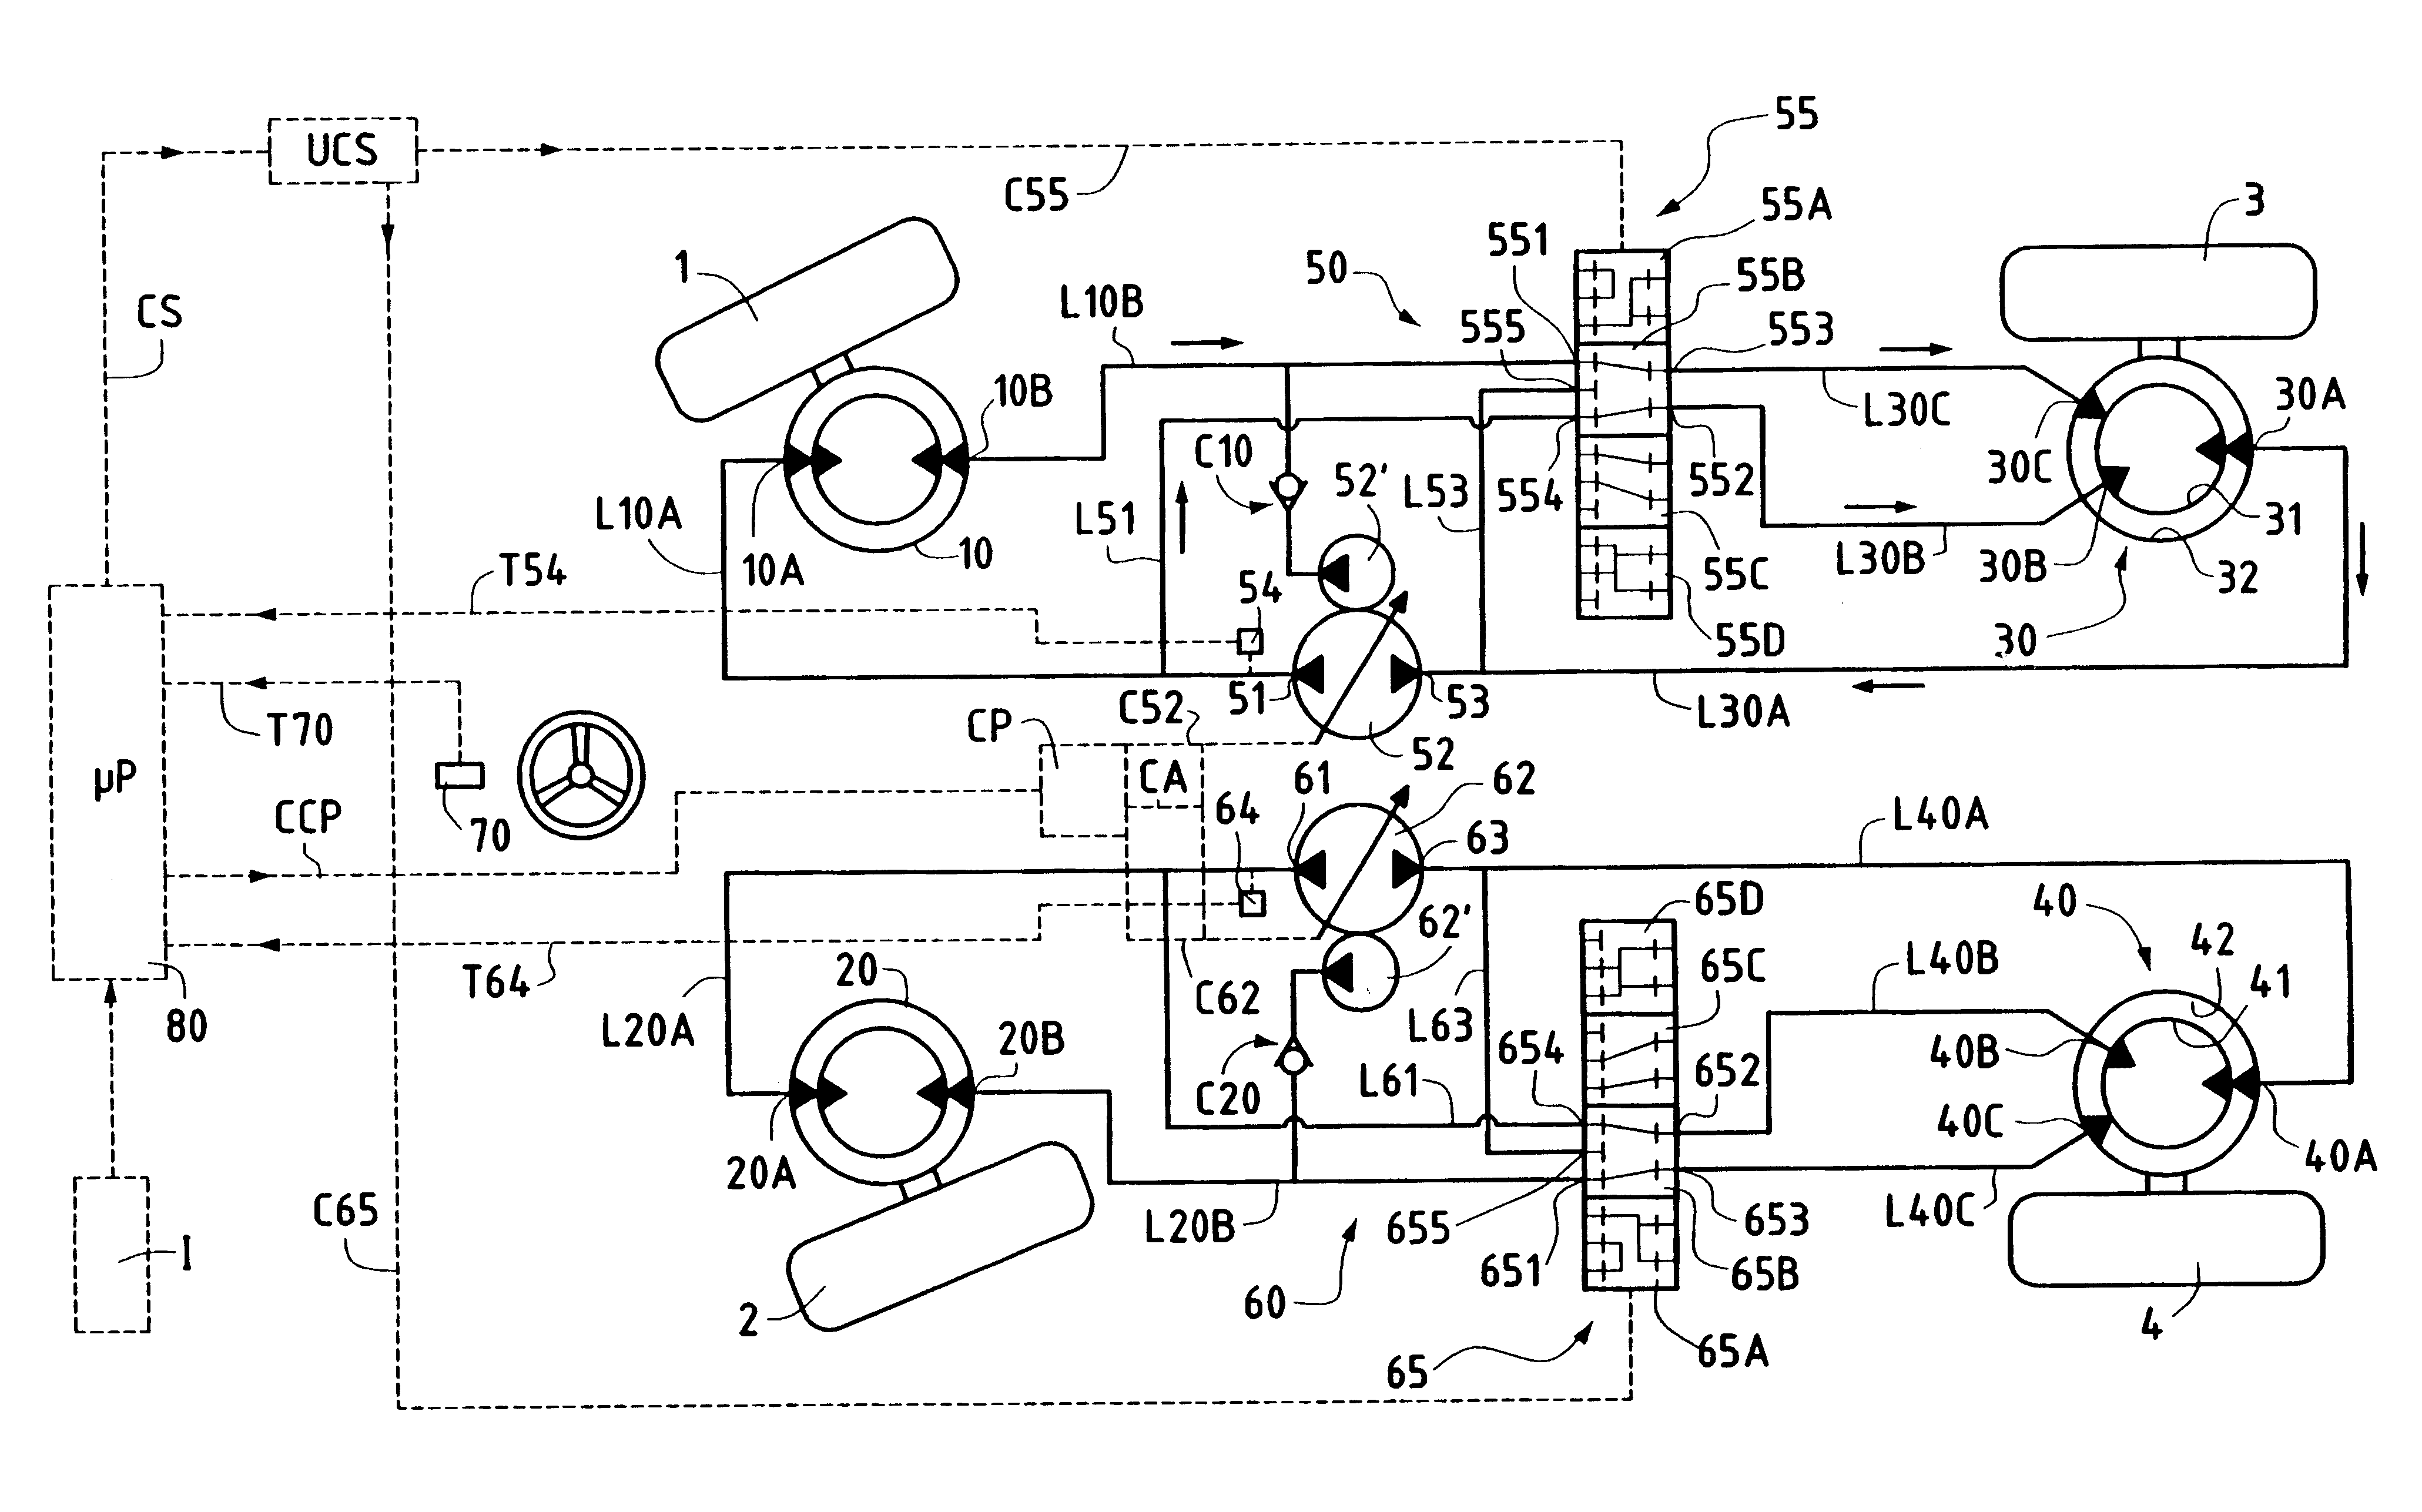 Transmission apparatus for a vehicle having at least two drivable axles